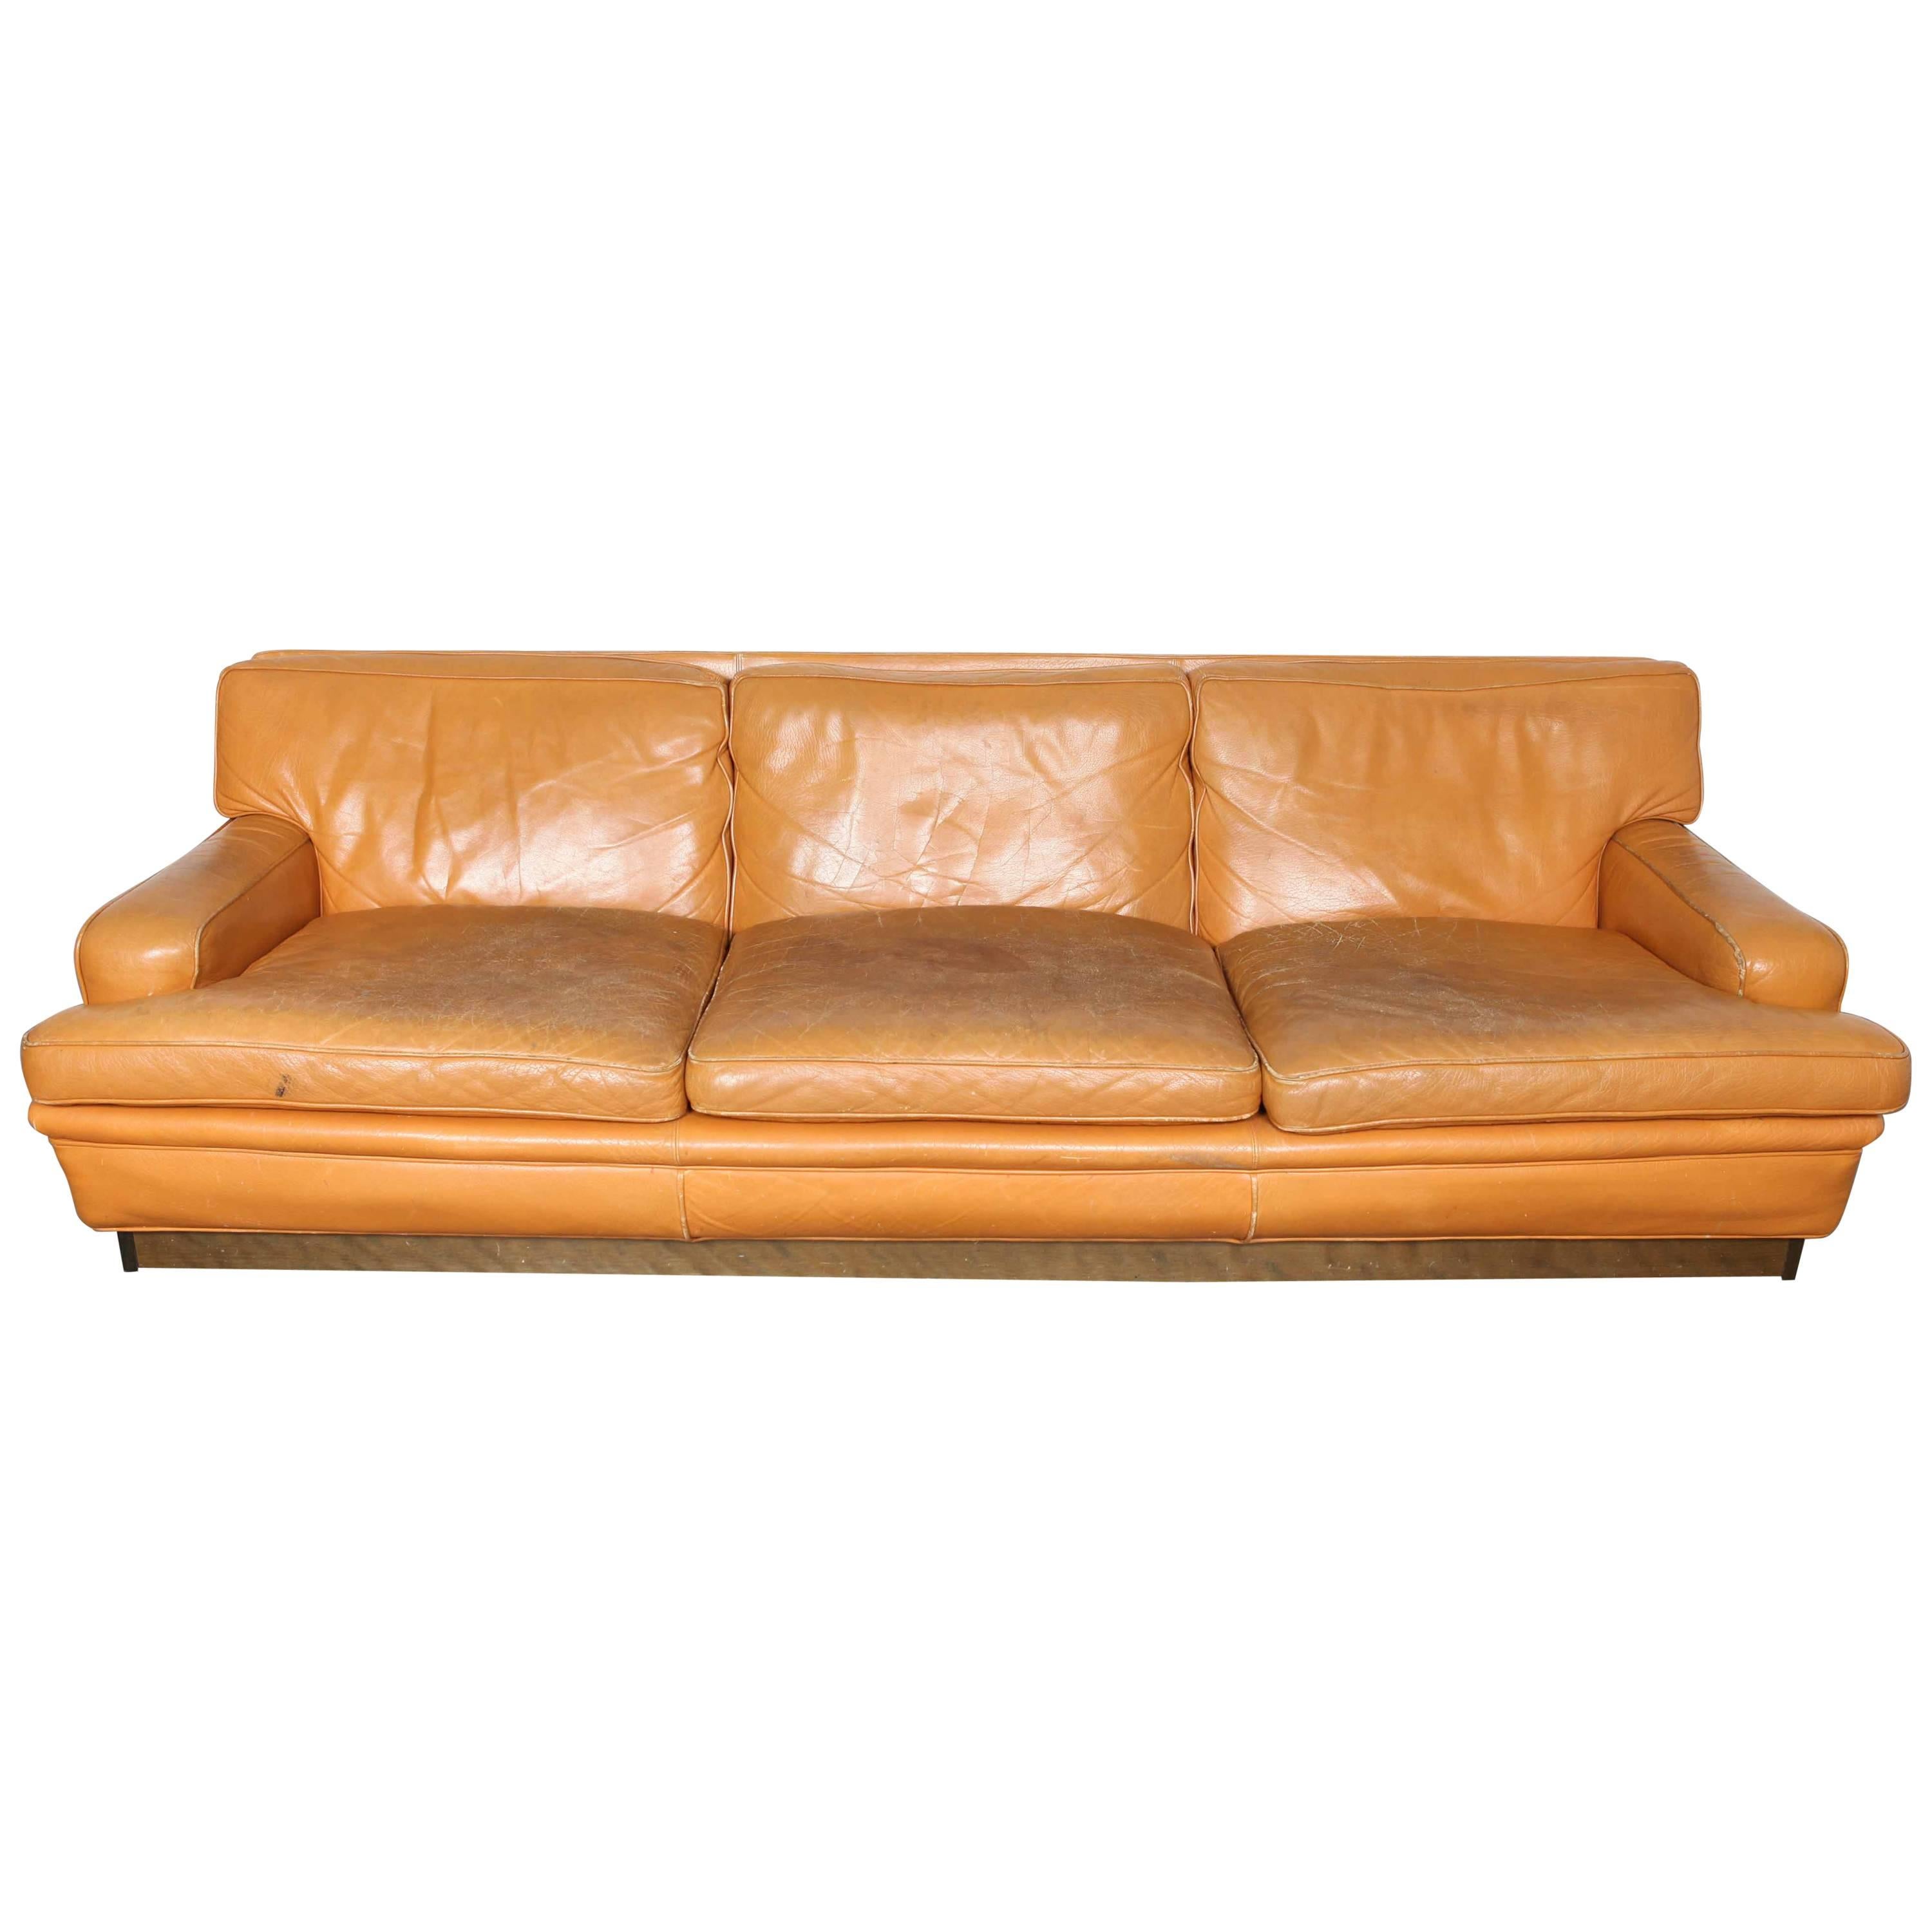 Three-Seat Camel Leather Sofa Attributed to Arne Norell